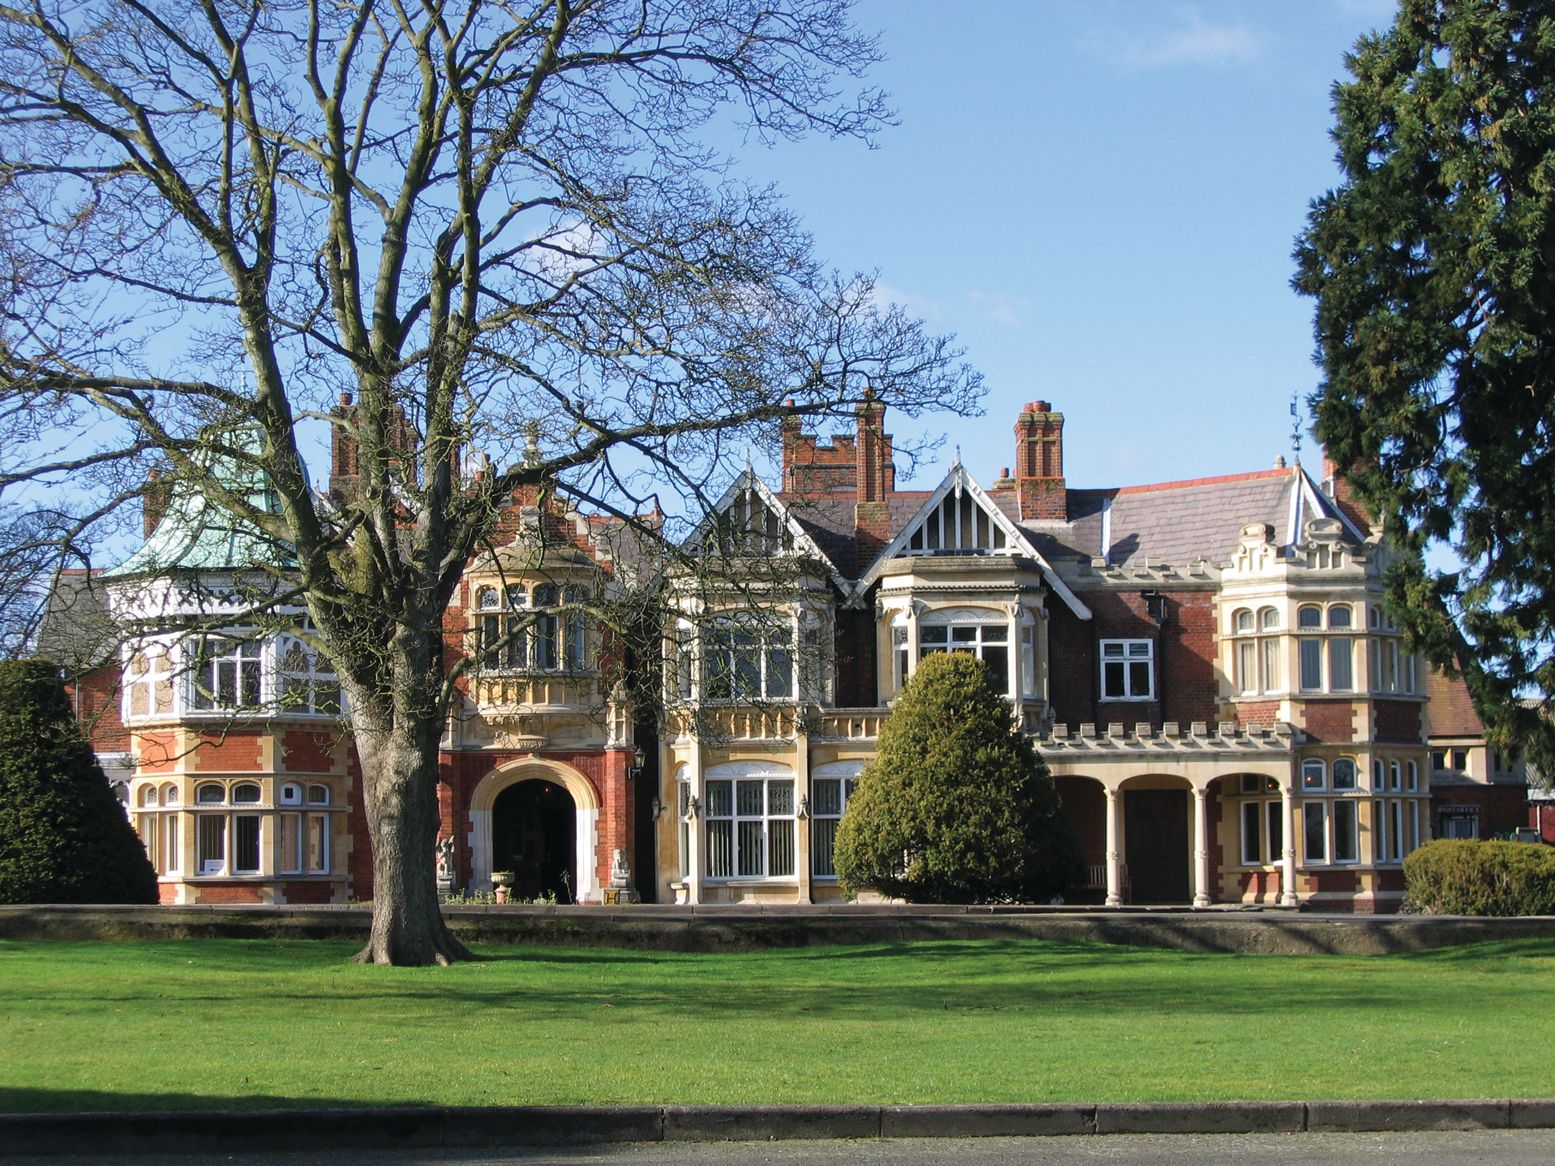 The elegant, stately façade of Bletchley Park today belies the nature of the top secret intelligence work that was conducted on the grounds of the estate during World War II.